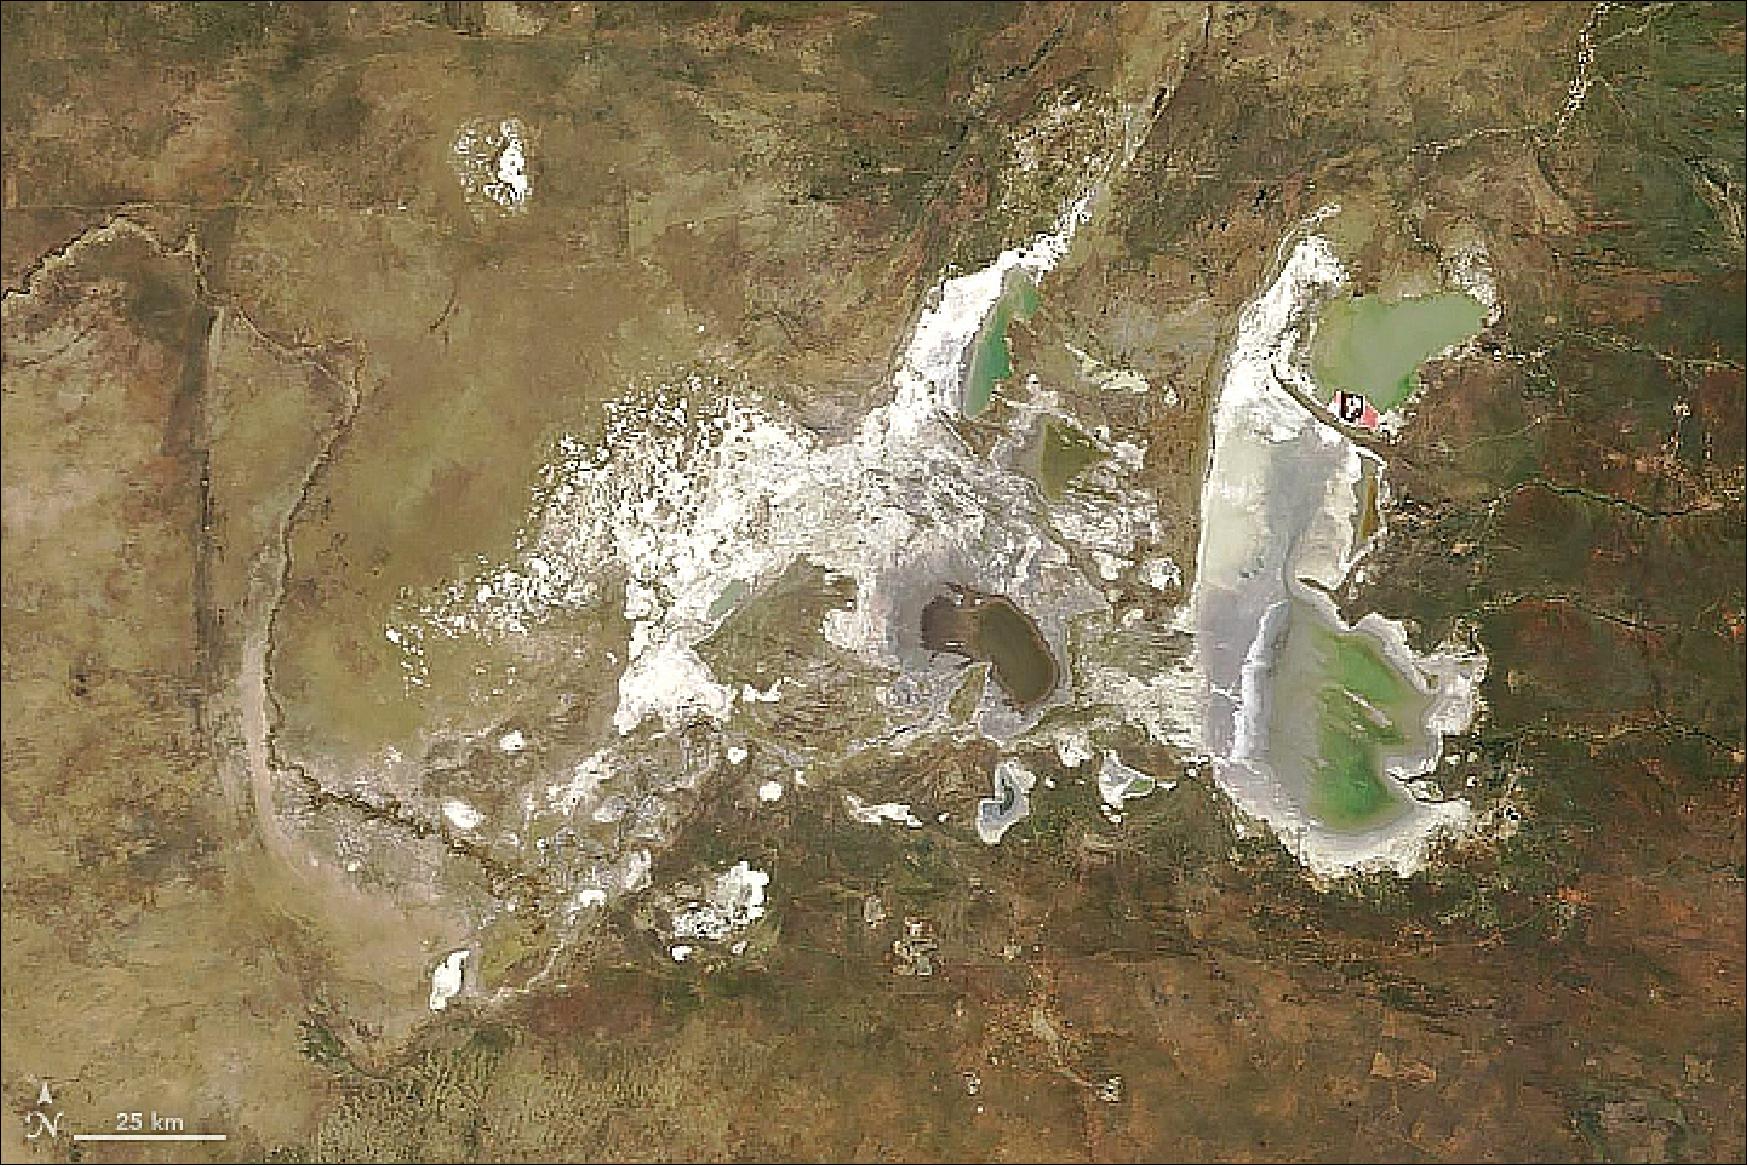 Figure 22: On June 10, 2018, the MODIS instrument on NASA’s Terra satellite acquired this natural-color image of the Makgadikgadi Salt Pans. The collection of salt flats covers roughly 30,000 km2 amidst desert and dry savanna in Botswana. Located in Makgadikgadi National Park and Nxai Pan National Park, the salt pans are rivaled in extent only by the Salar de Uyuni in Bolivia (image credit: NASA Earth Observatory, image by Joshua Stevens, using MODIS data from LANCE/EOSDIS Rapid Response, story by Mike Carlowicz)